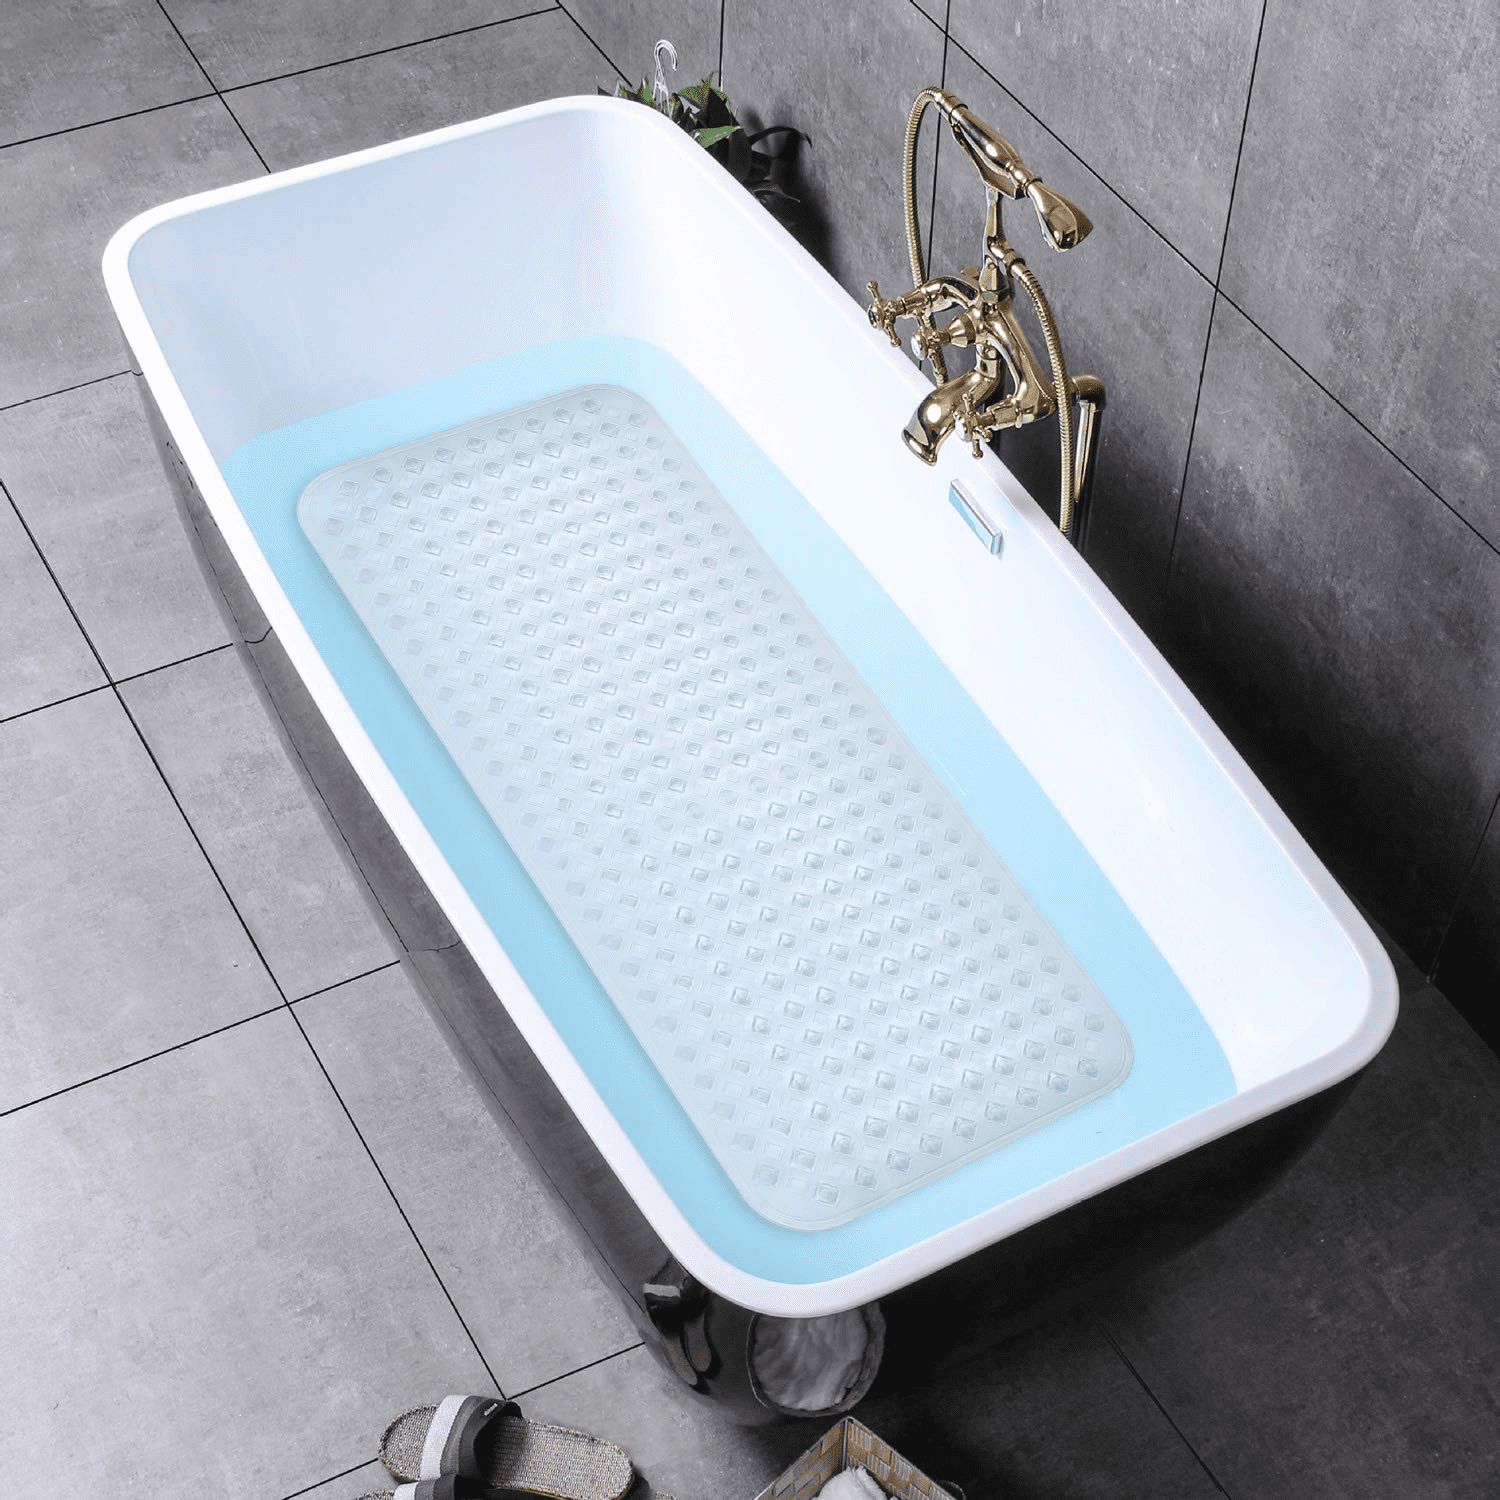 Gorilla Grip Patented Bath Tub and Shower Mat, 35x16, Machine Washable,  Extra Large Bathtub Mats with Drain Holes and Suction Cu